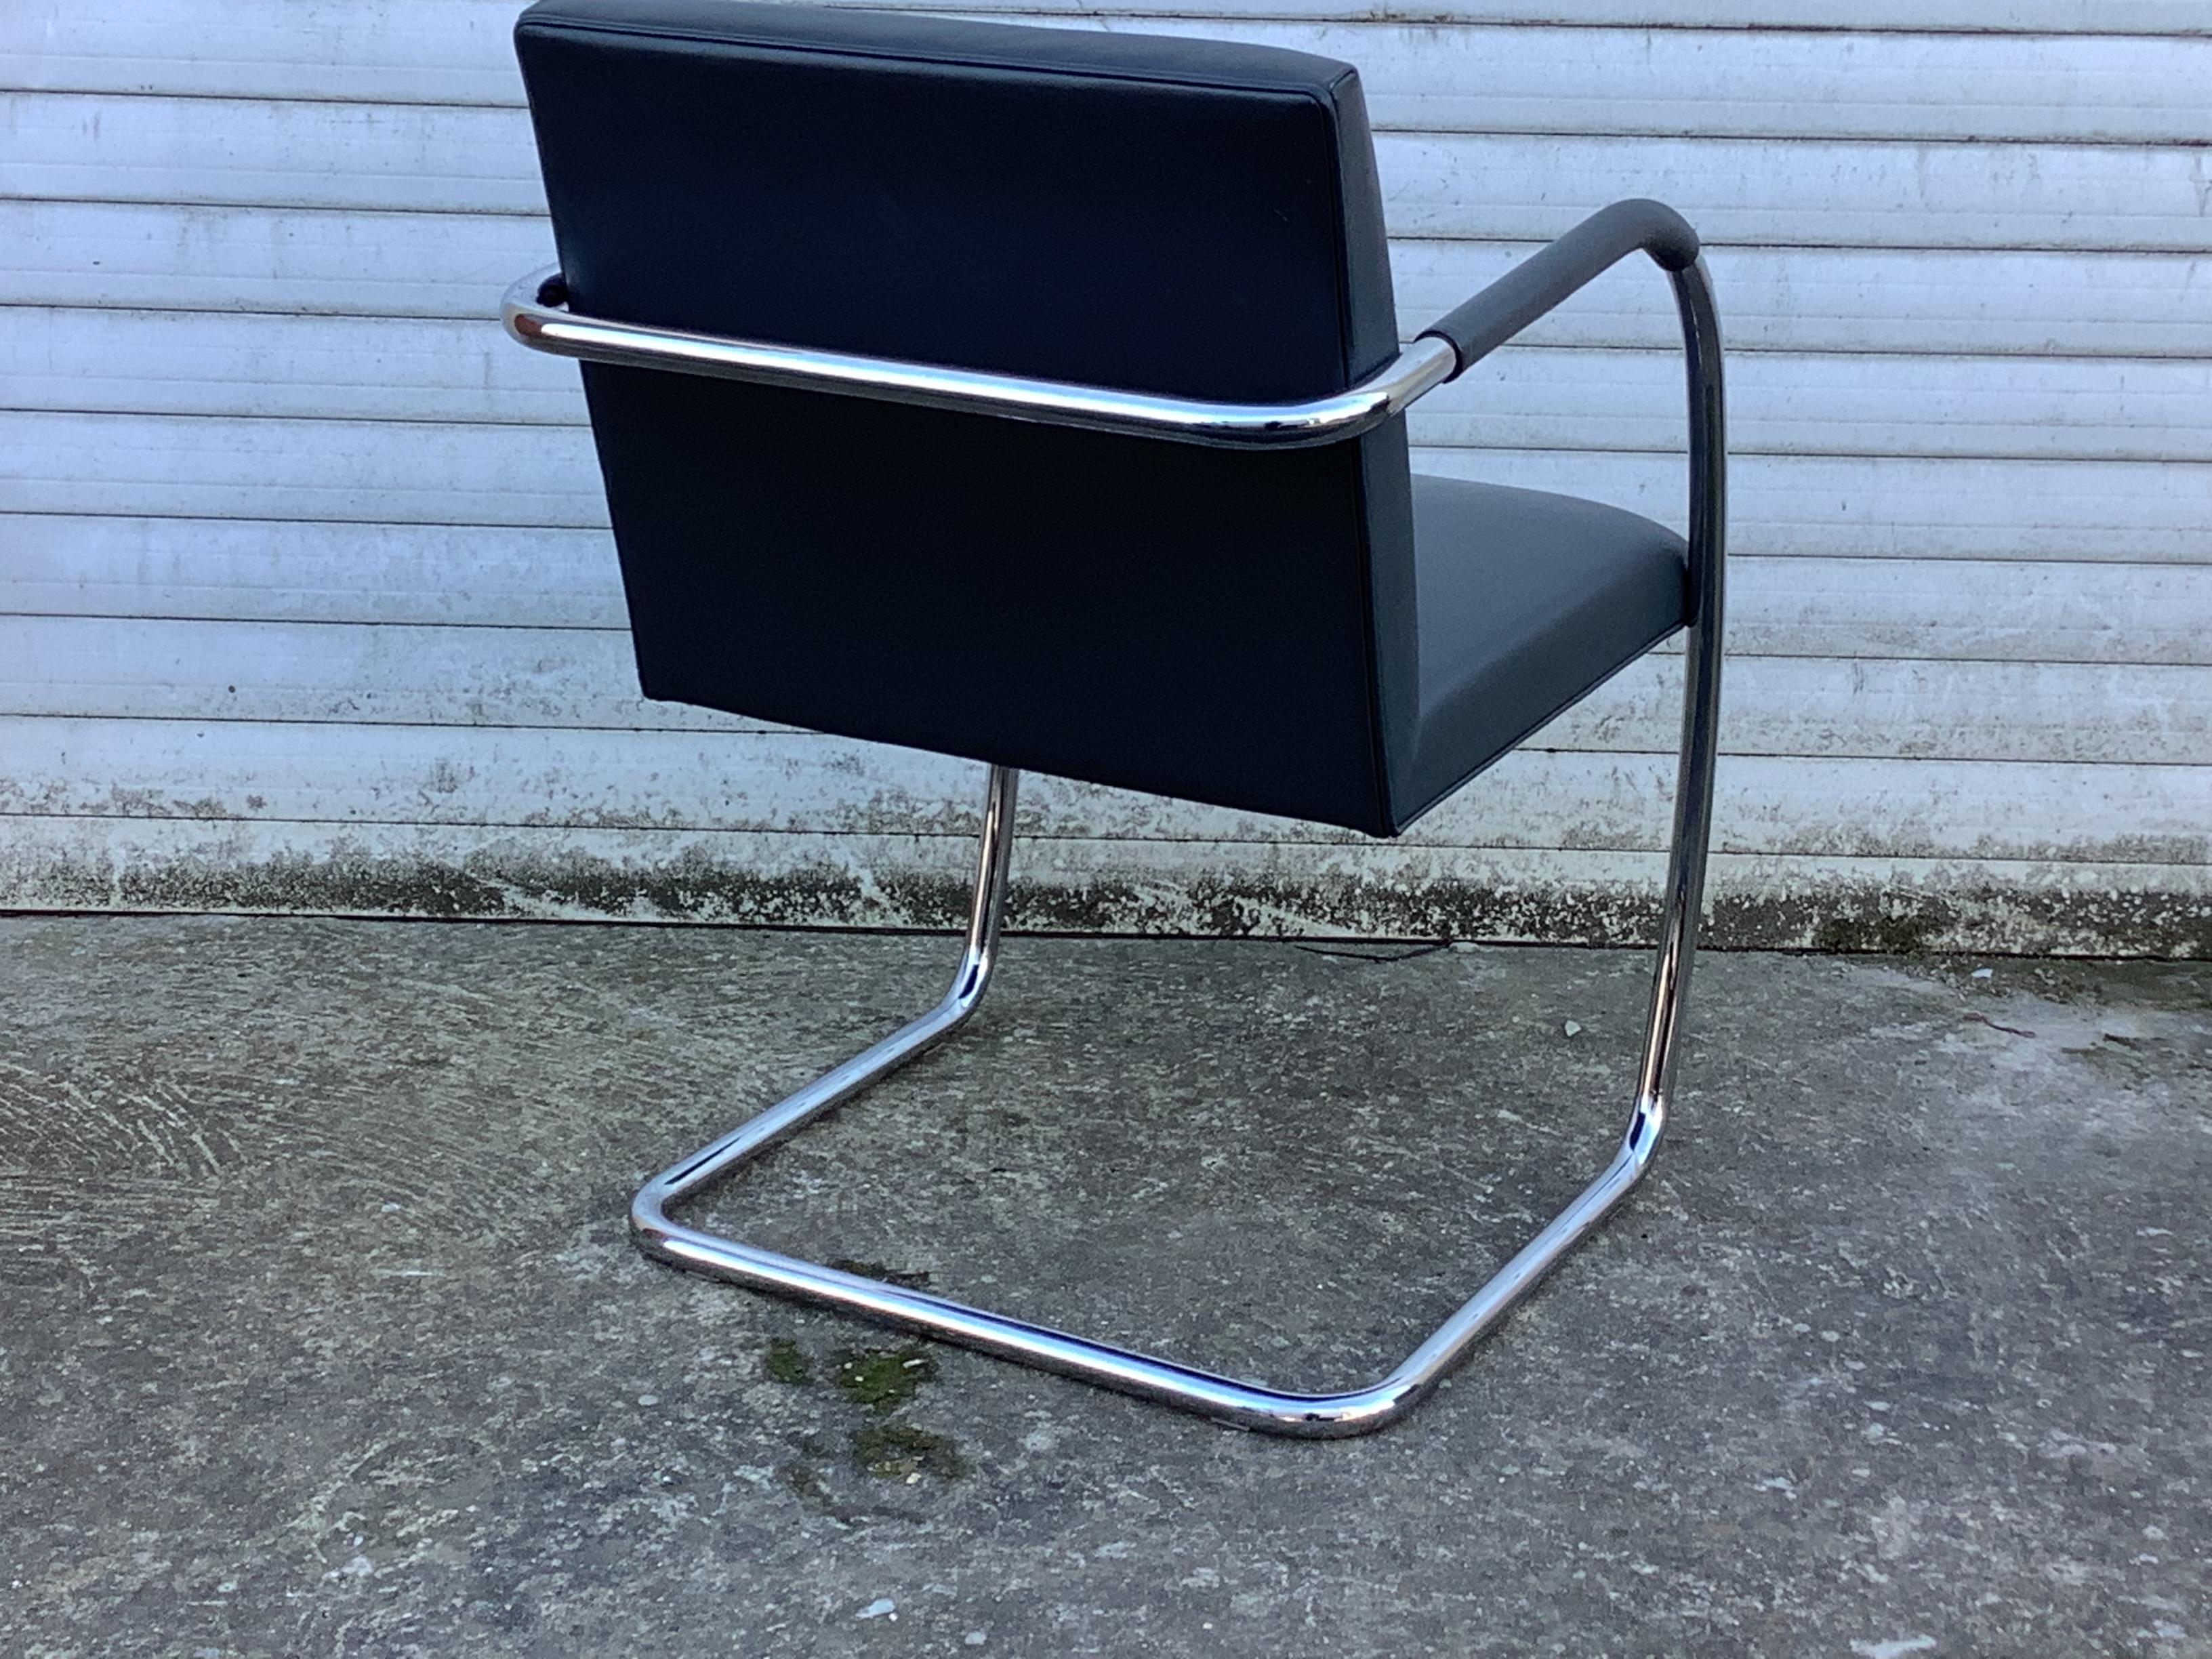 A design icon 

Designed by Ludwig Mies Van Der Rohe in 1930 this Knoll armchair has a frame made from tubular polished chrome. Ingeniously, there are no visible connections between the seat and the frame as the seat element cantilevers over the